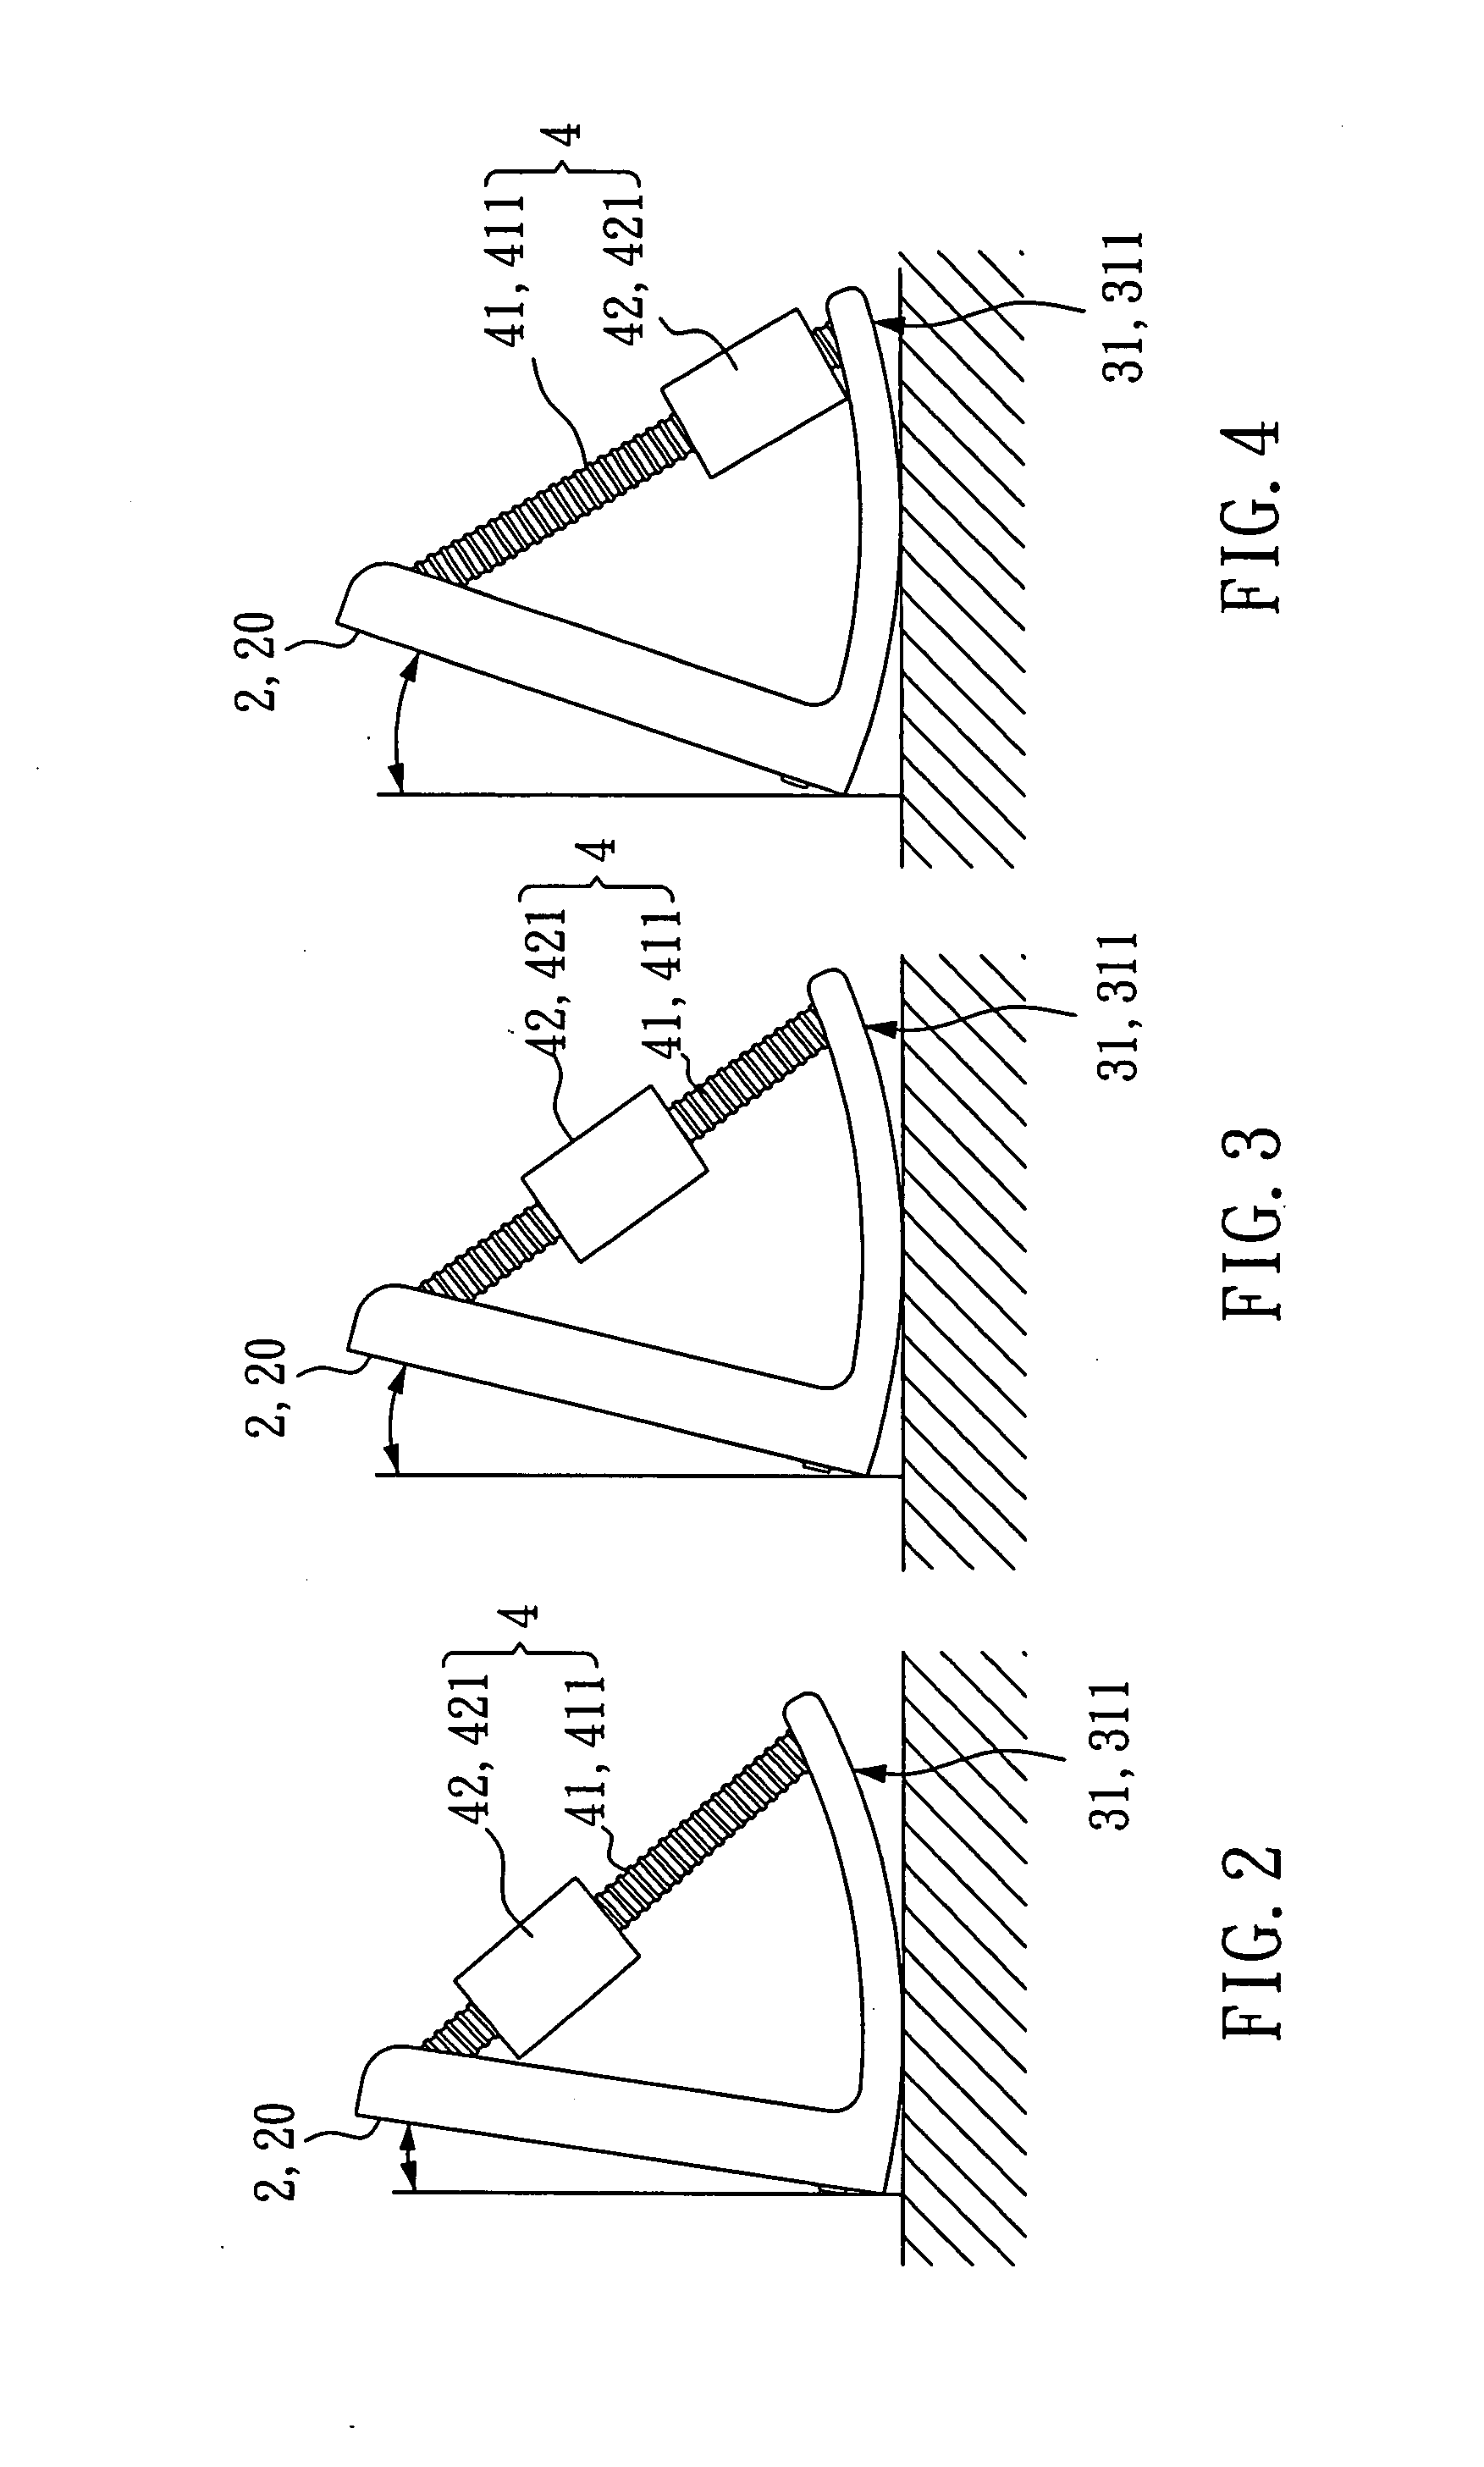 Display device having an adjustable counterweight structure